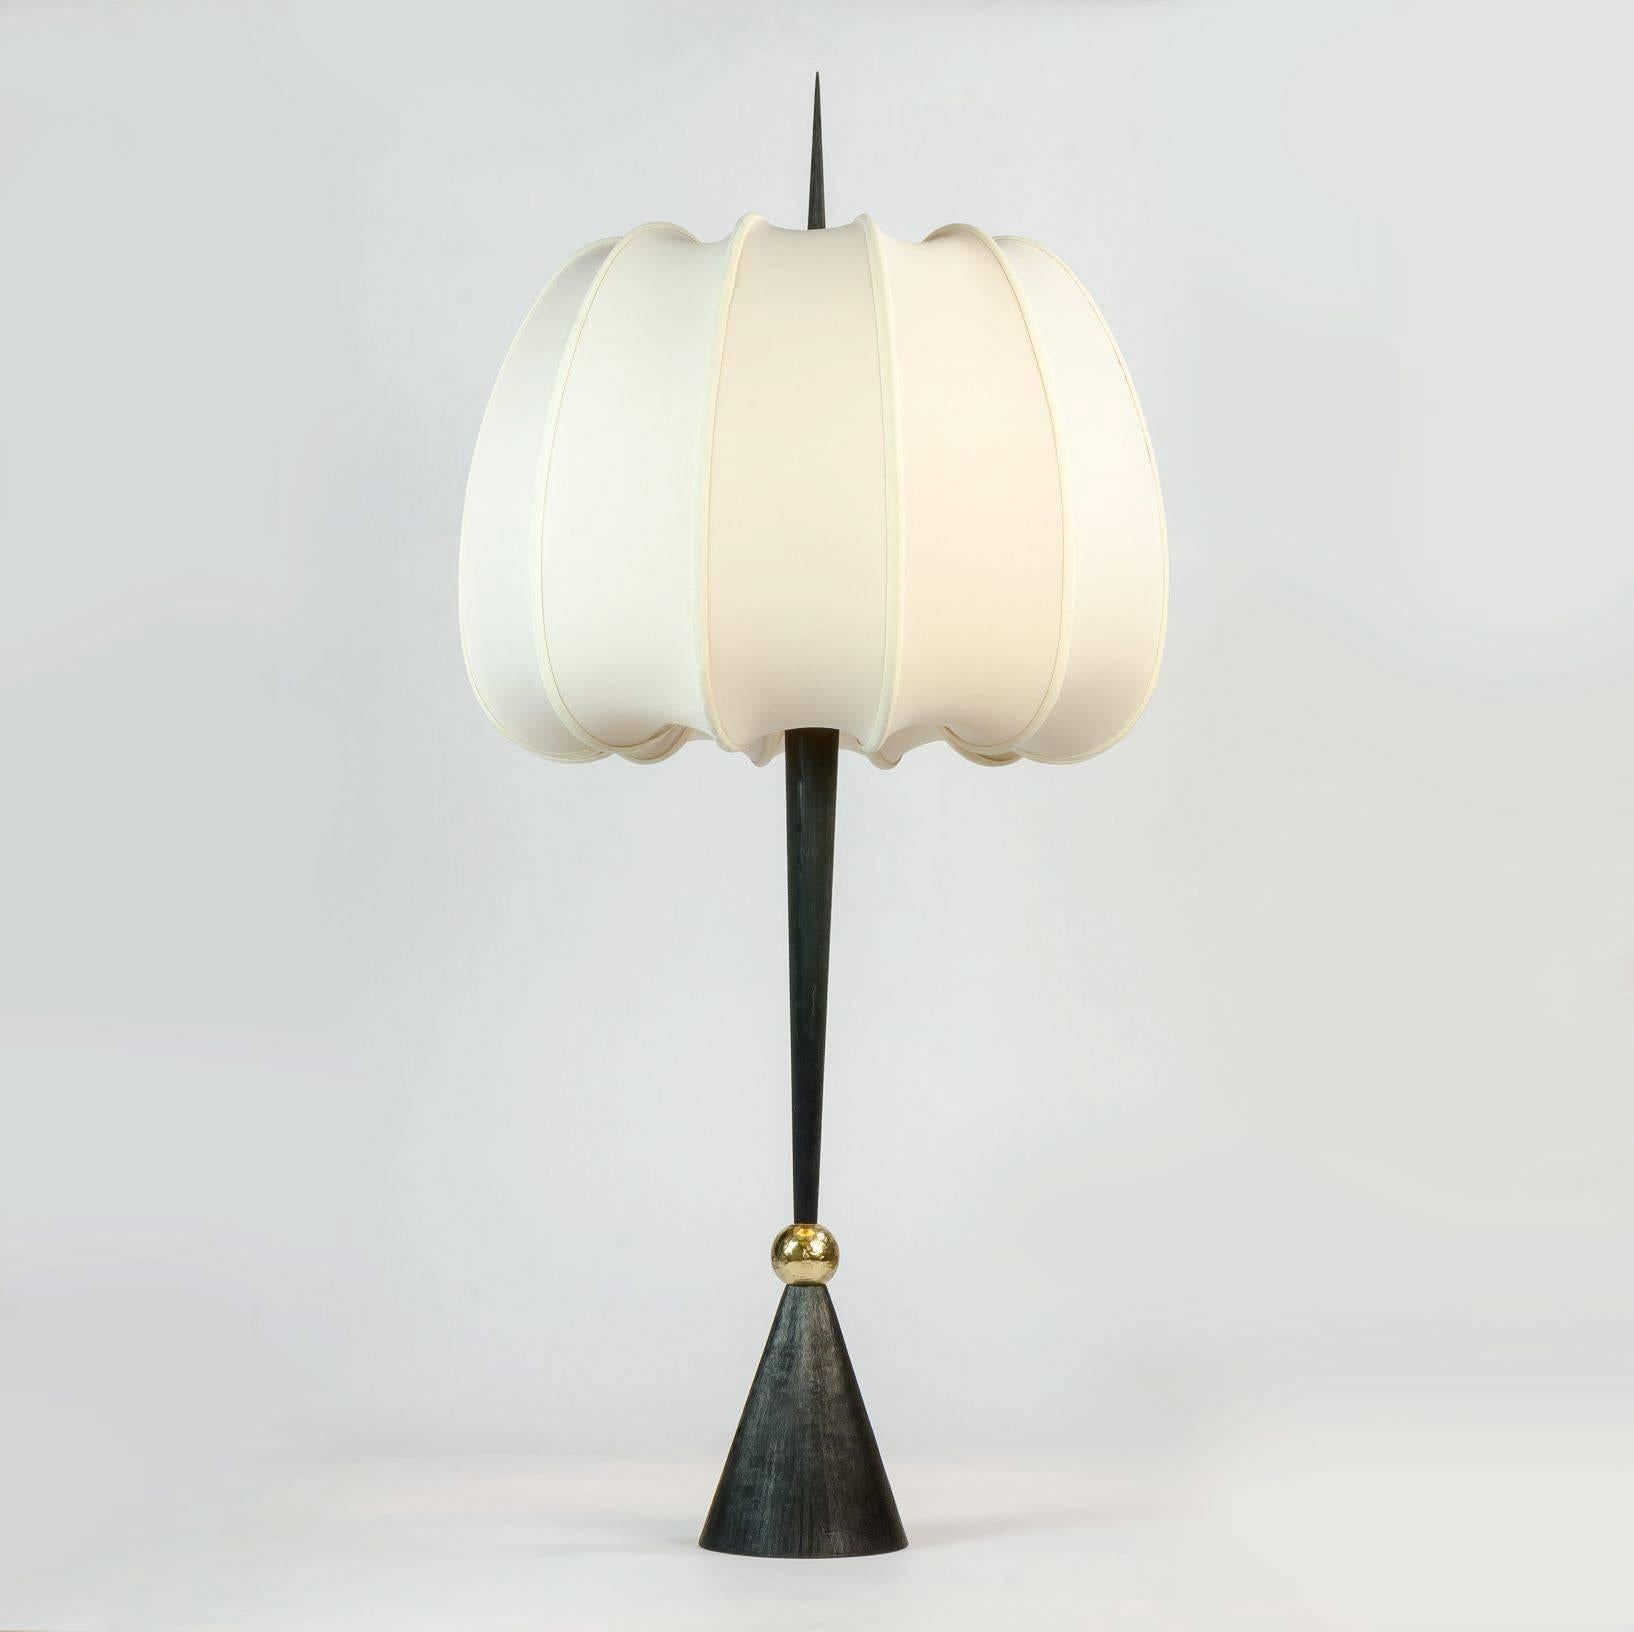 One of Achille Salvagni's most arresting pieces, Lancea features a conical base topped with a brass ball, a burnished bronze 'lance,' and silk shade ribbed in such a way as to create the illusion of inflation. 

Limited edition of 10.